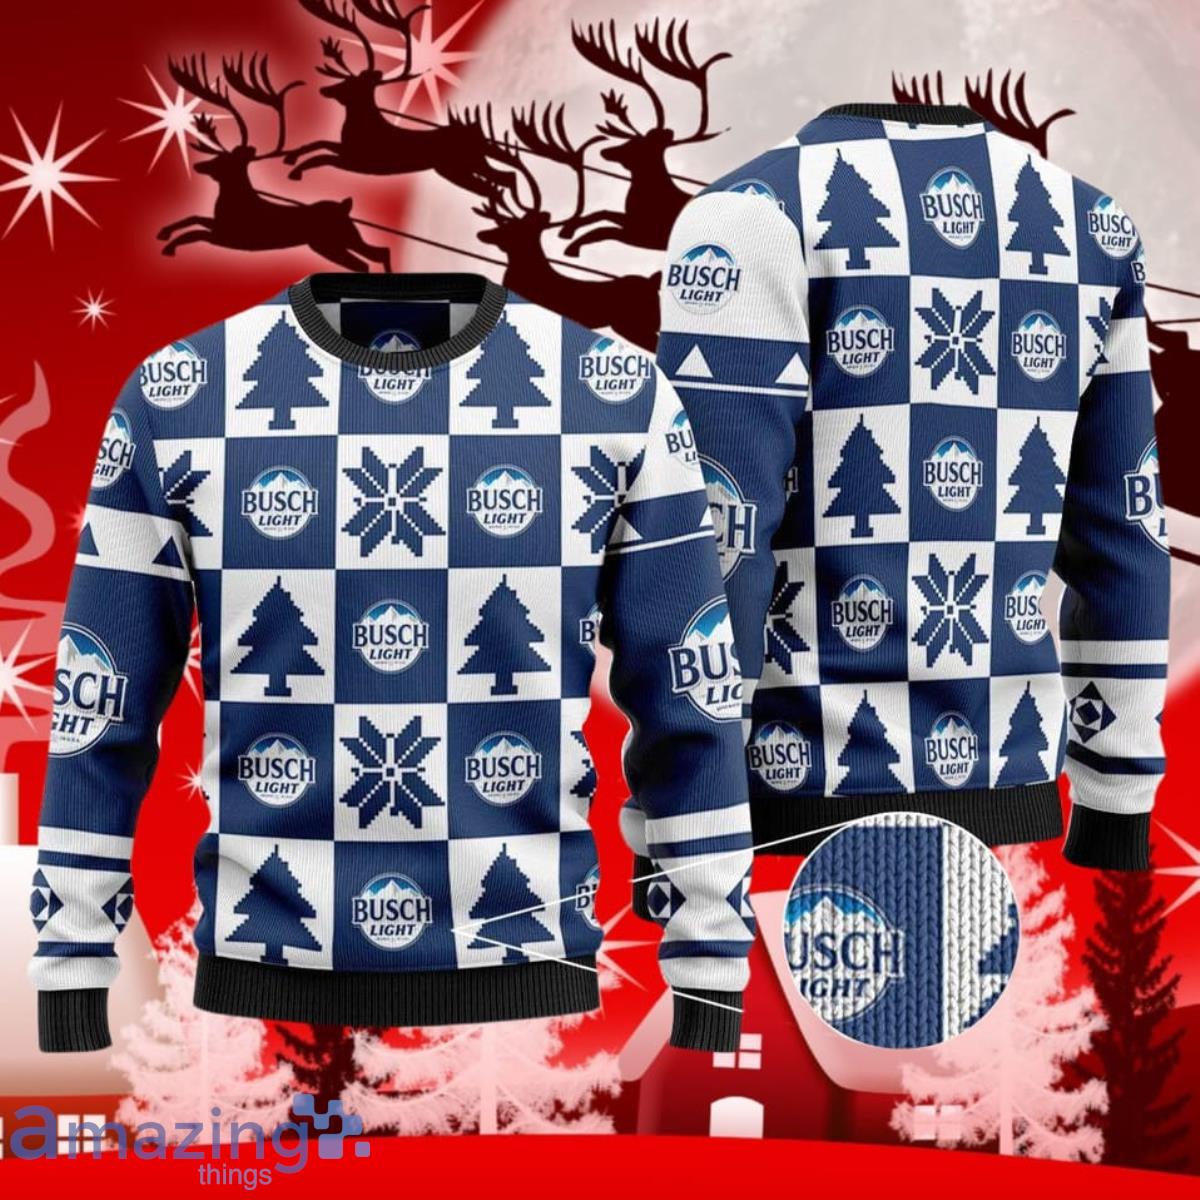 Christmas Canada Maple Leaf Ugly Christmas Sweater For Men And